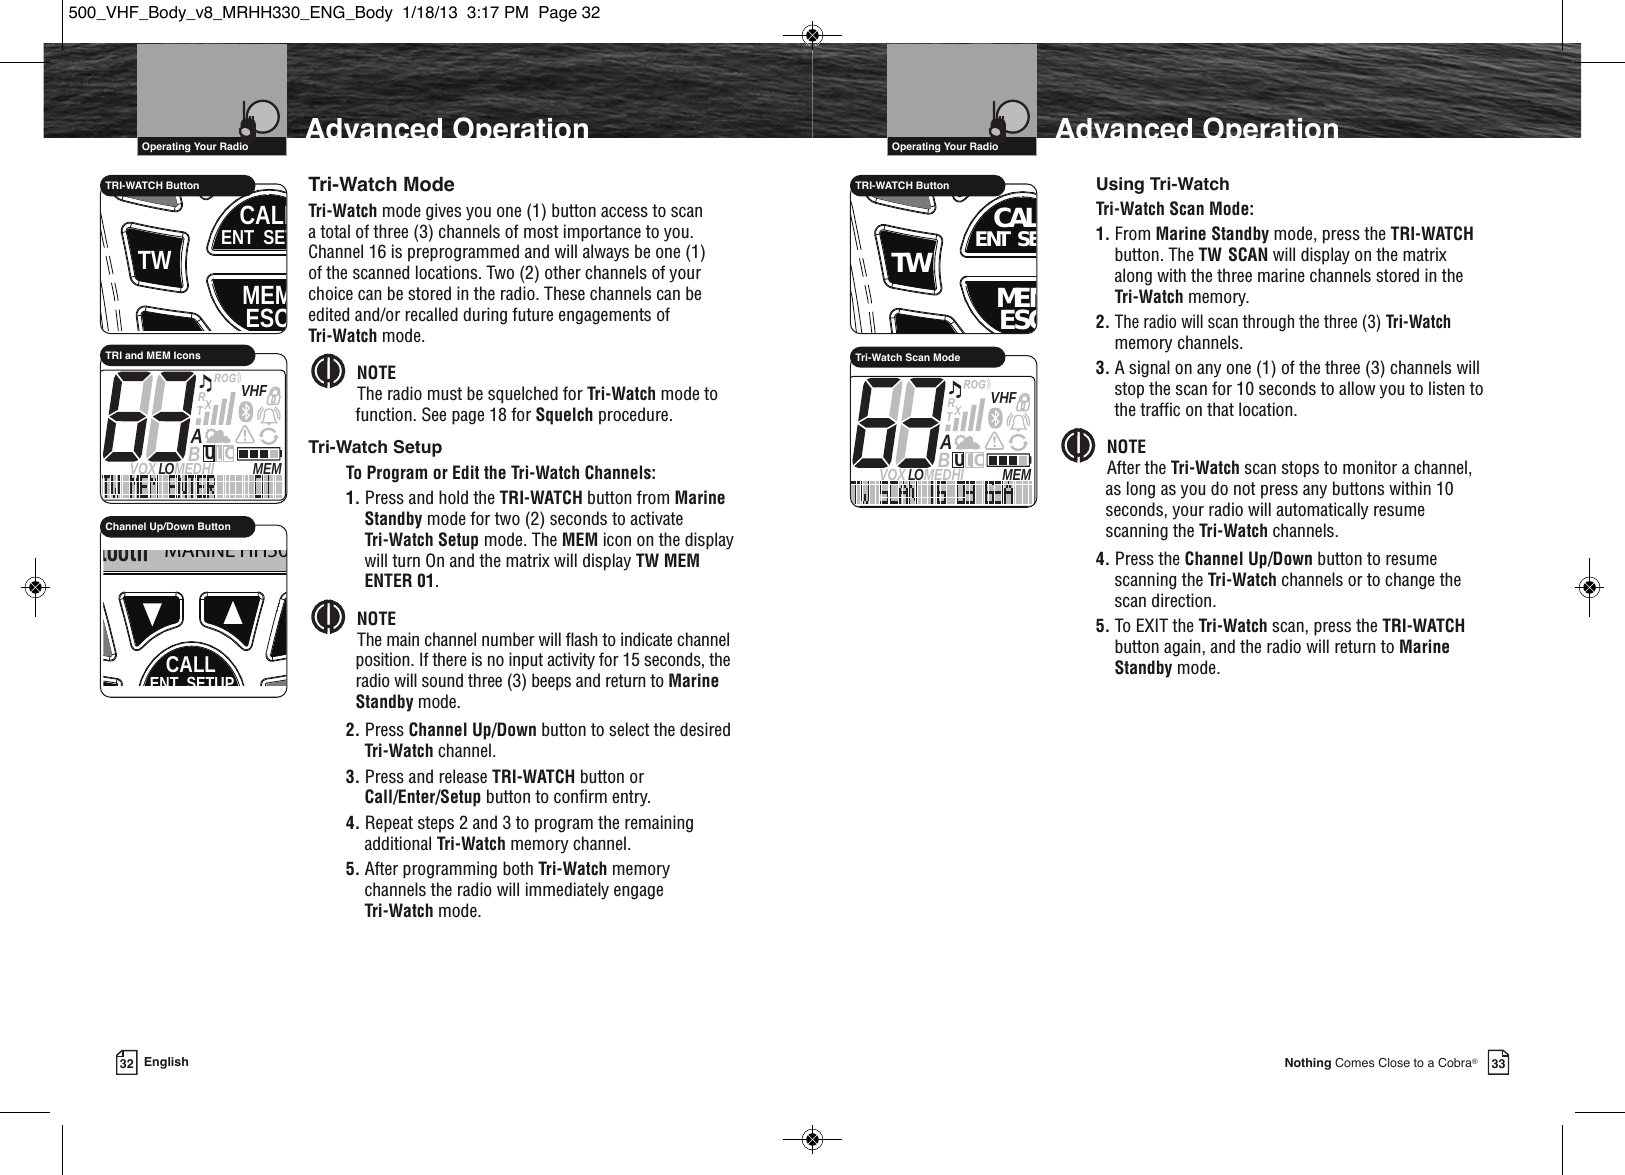 Page 19 of Cobra Electronics MRHH500 BT ACCESSORY IN MARINE RADIO User Manual MRHH330 ENG Body